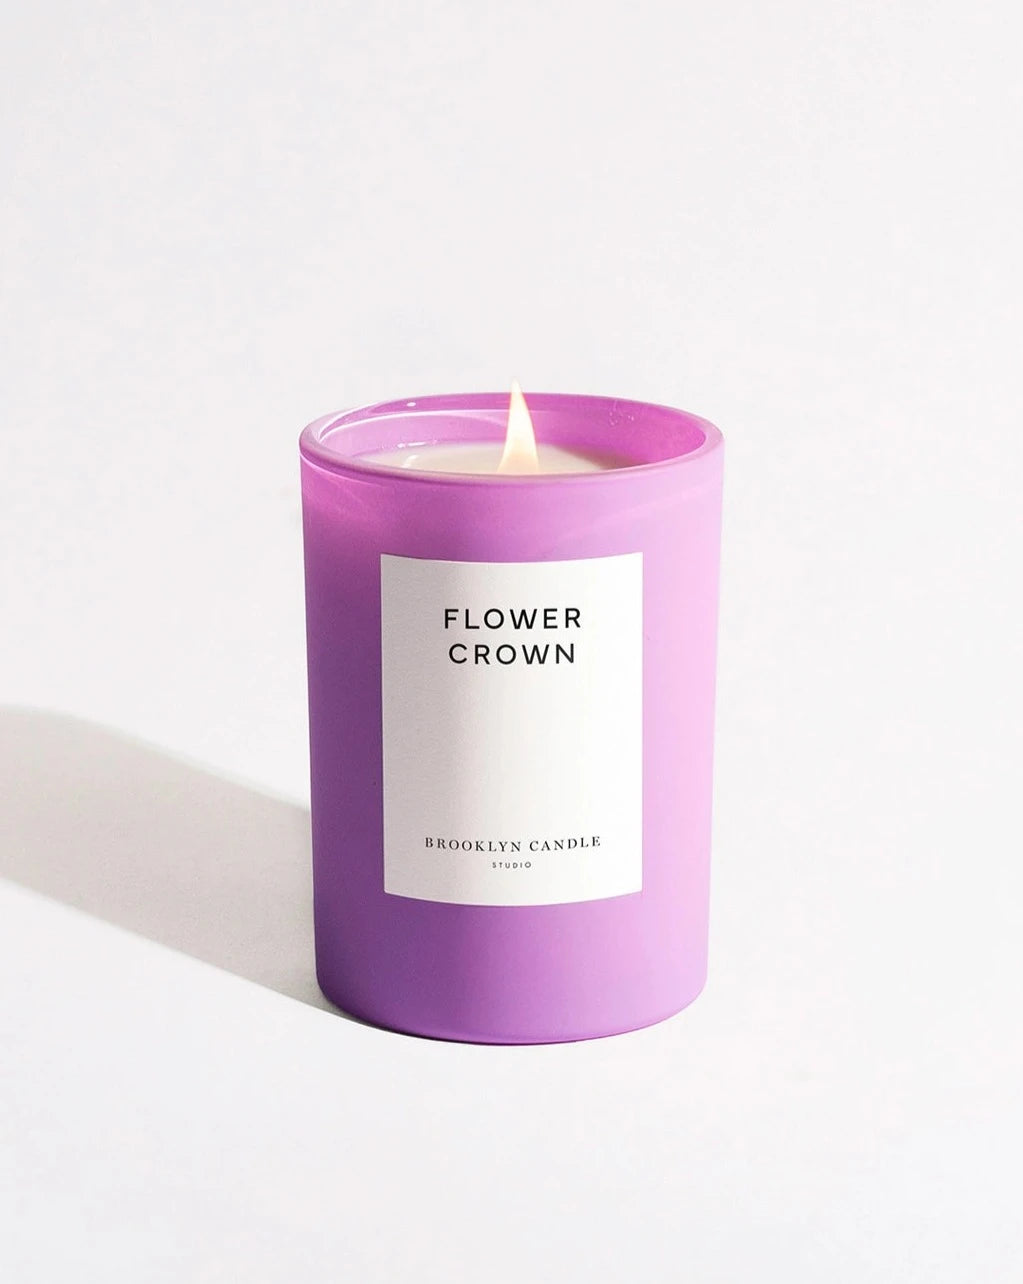 Brooklyn Candle Studio Flower Crown Candle